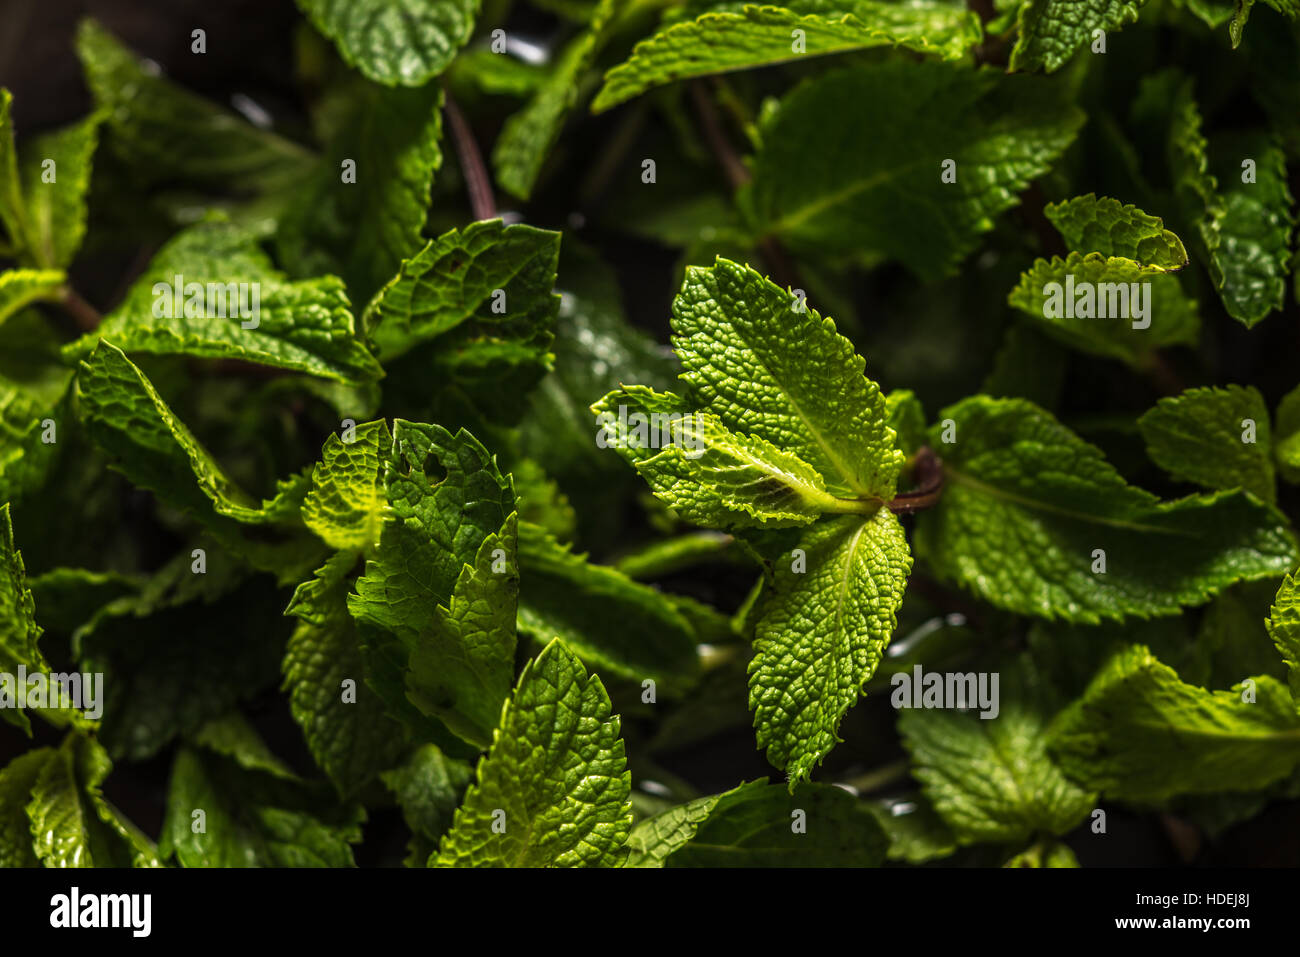 Mint leaves background close-up Stock Photo